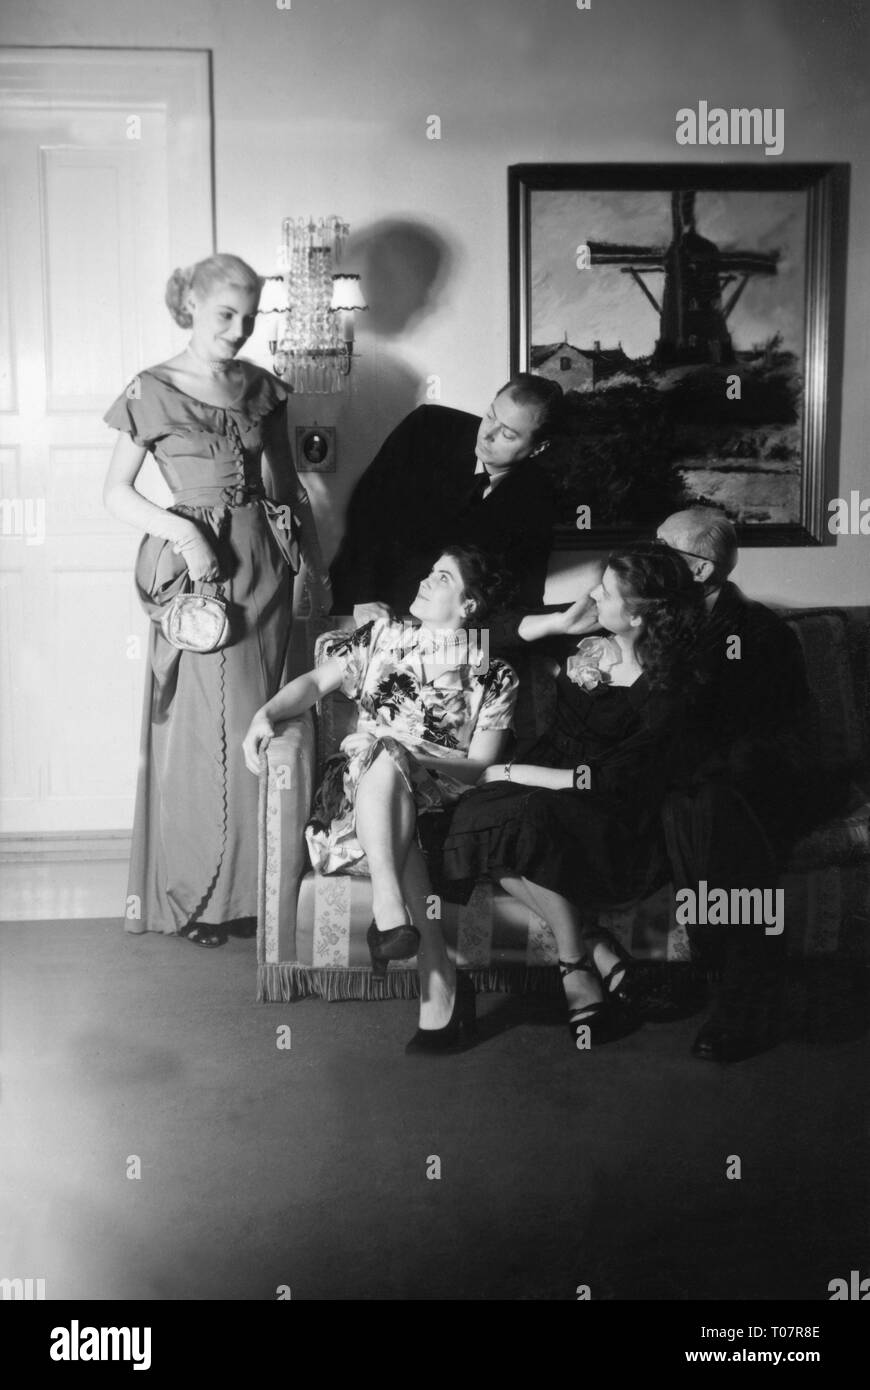 people, society, rules of politeness, clothes, do not wear evening dress unless it is expressly required, scene, 1950s, Additional-Rights-Clearance-Info-Not-Available Stock Photo